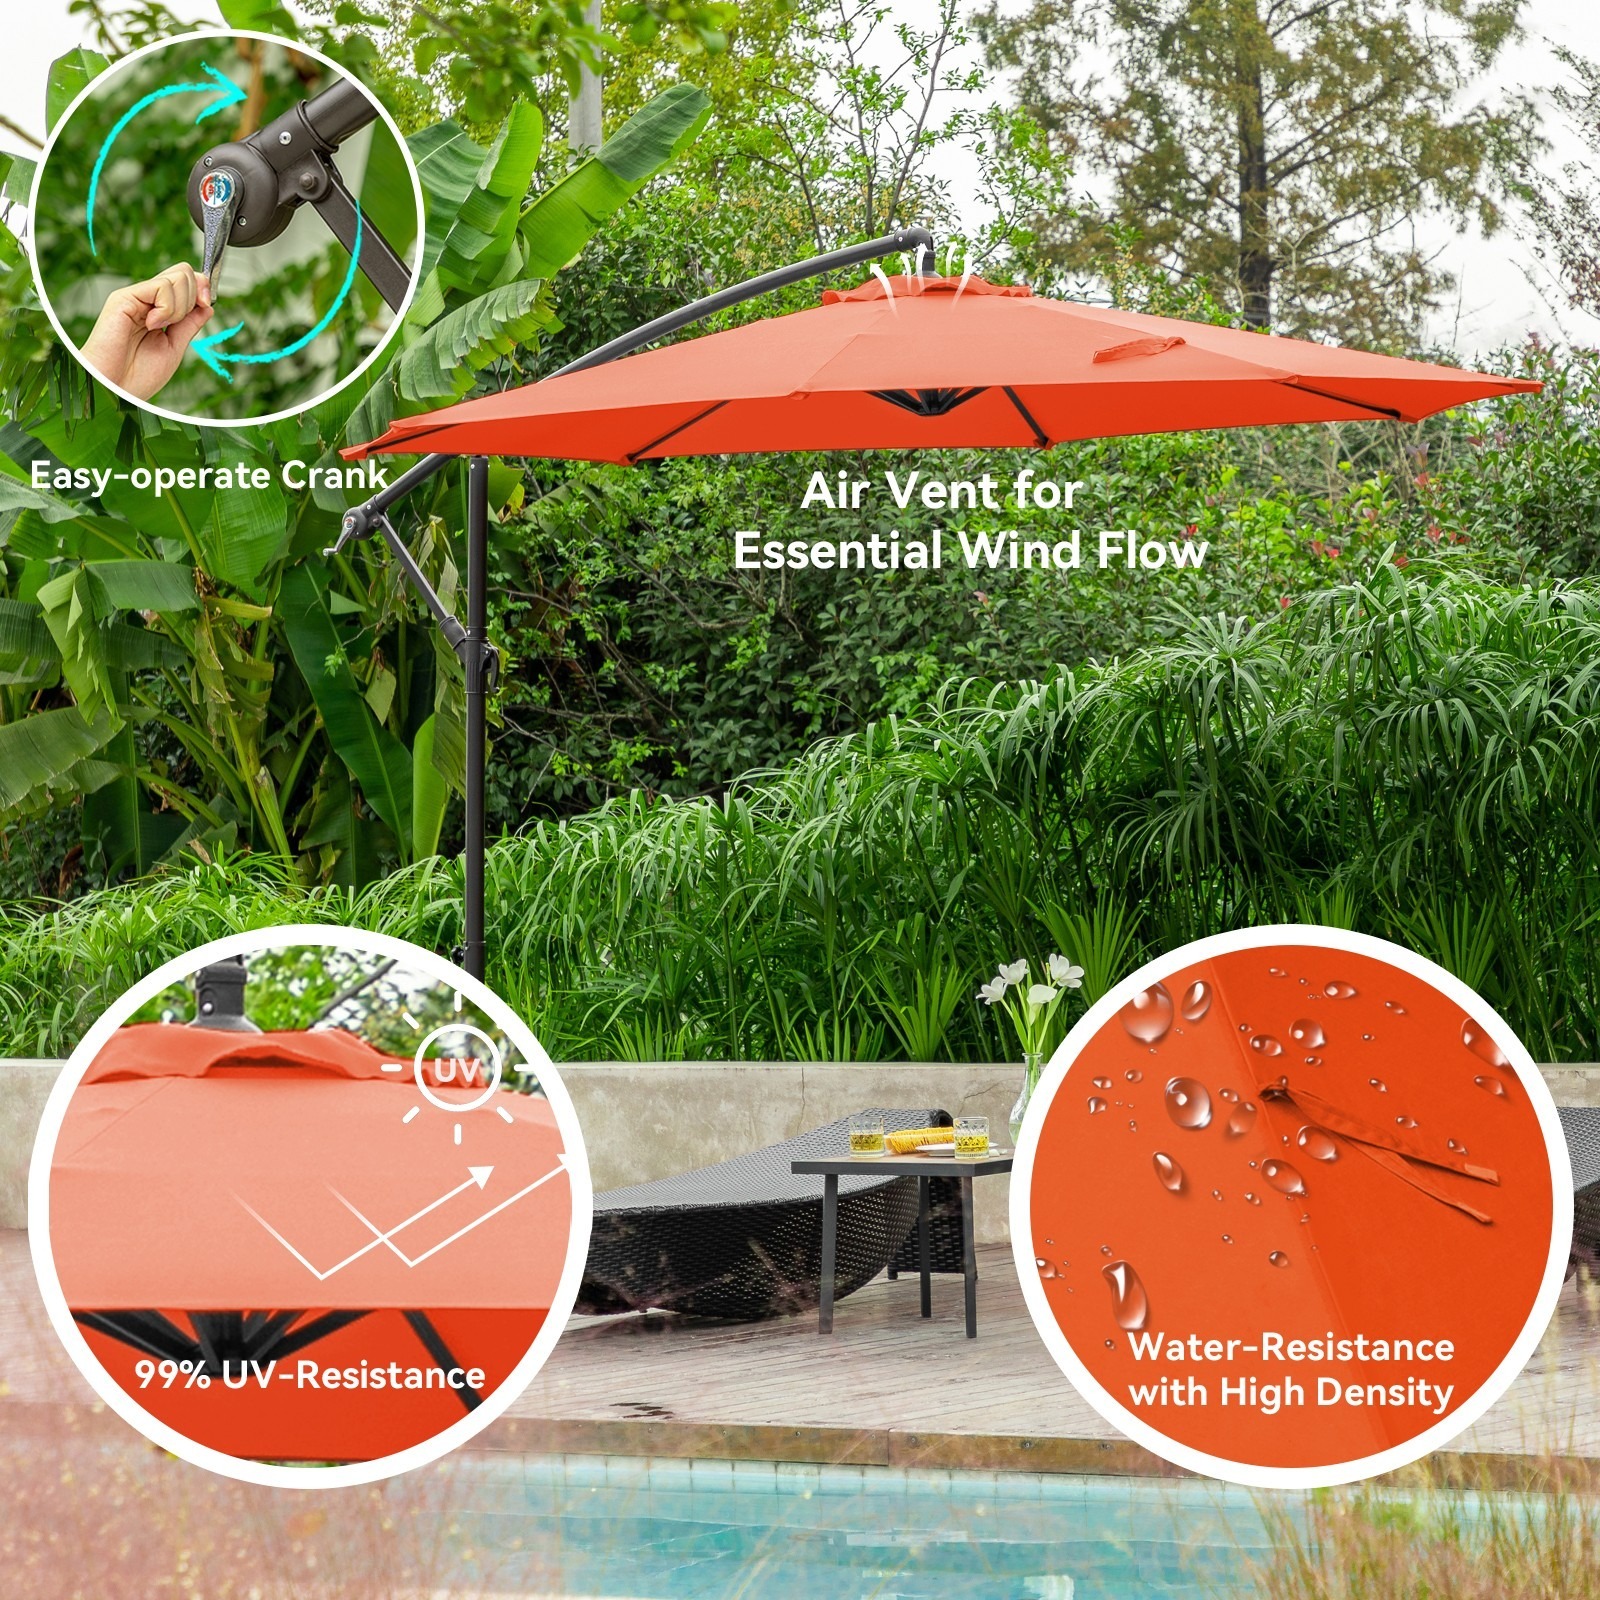 Serwall 10ft Heavy Duty Patio Hanging Offset Cantilever Patio Umbrella W/ Base Included, Orange - image 2 of 6